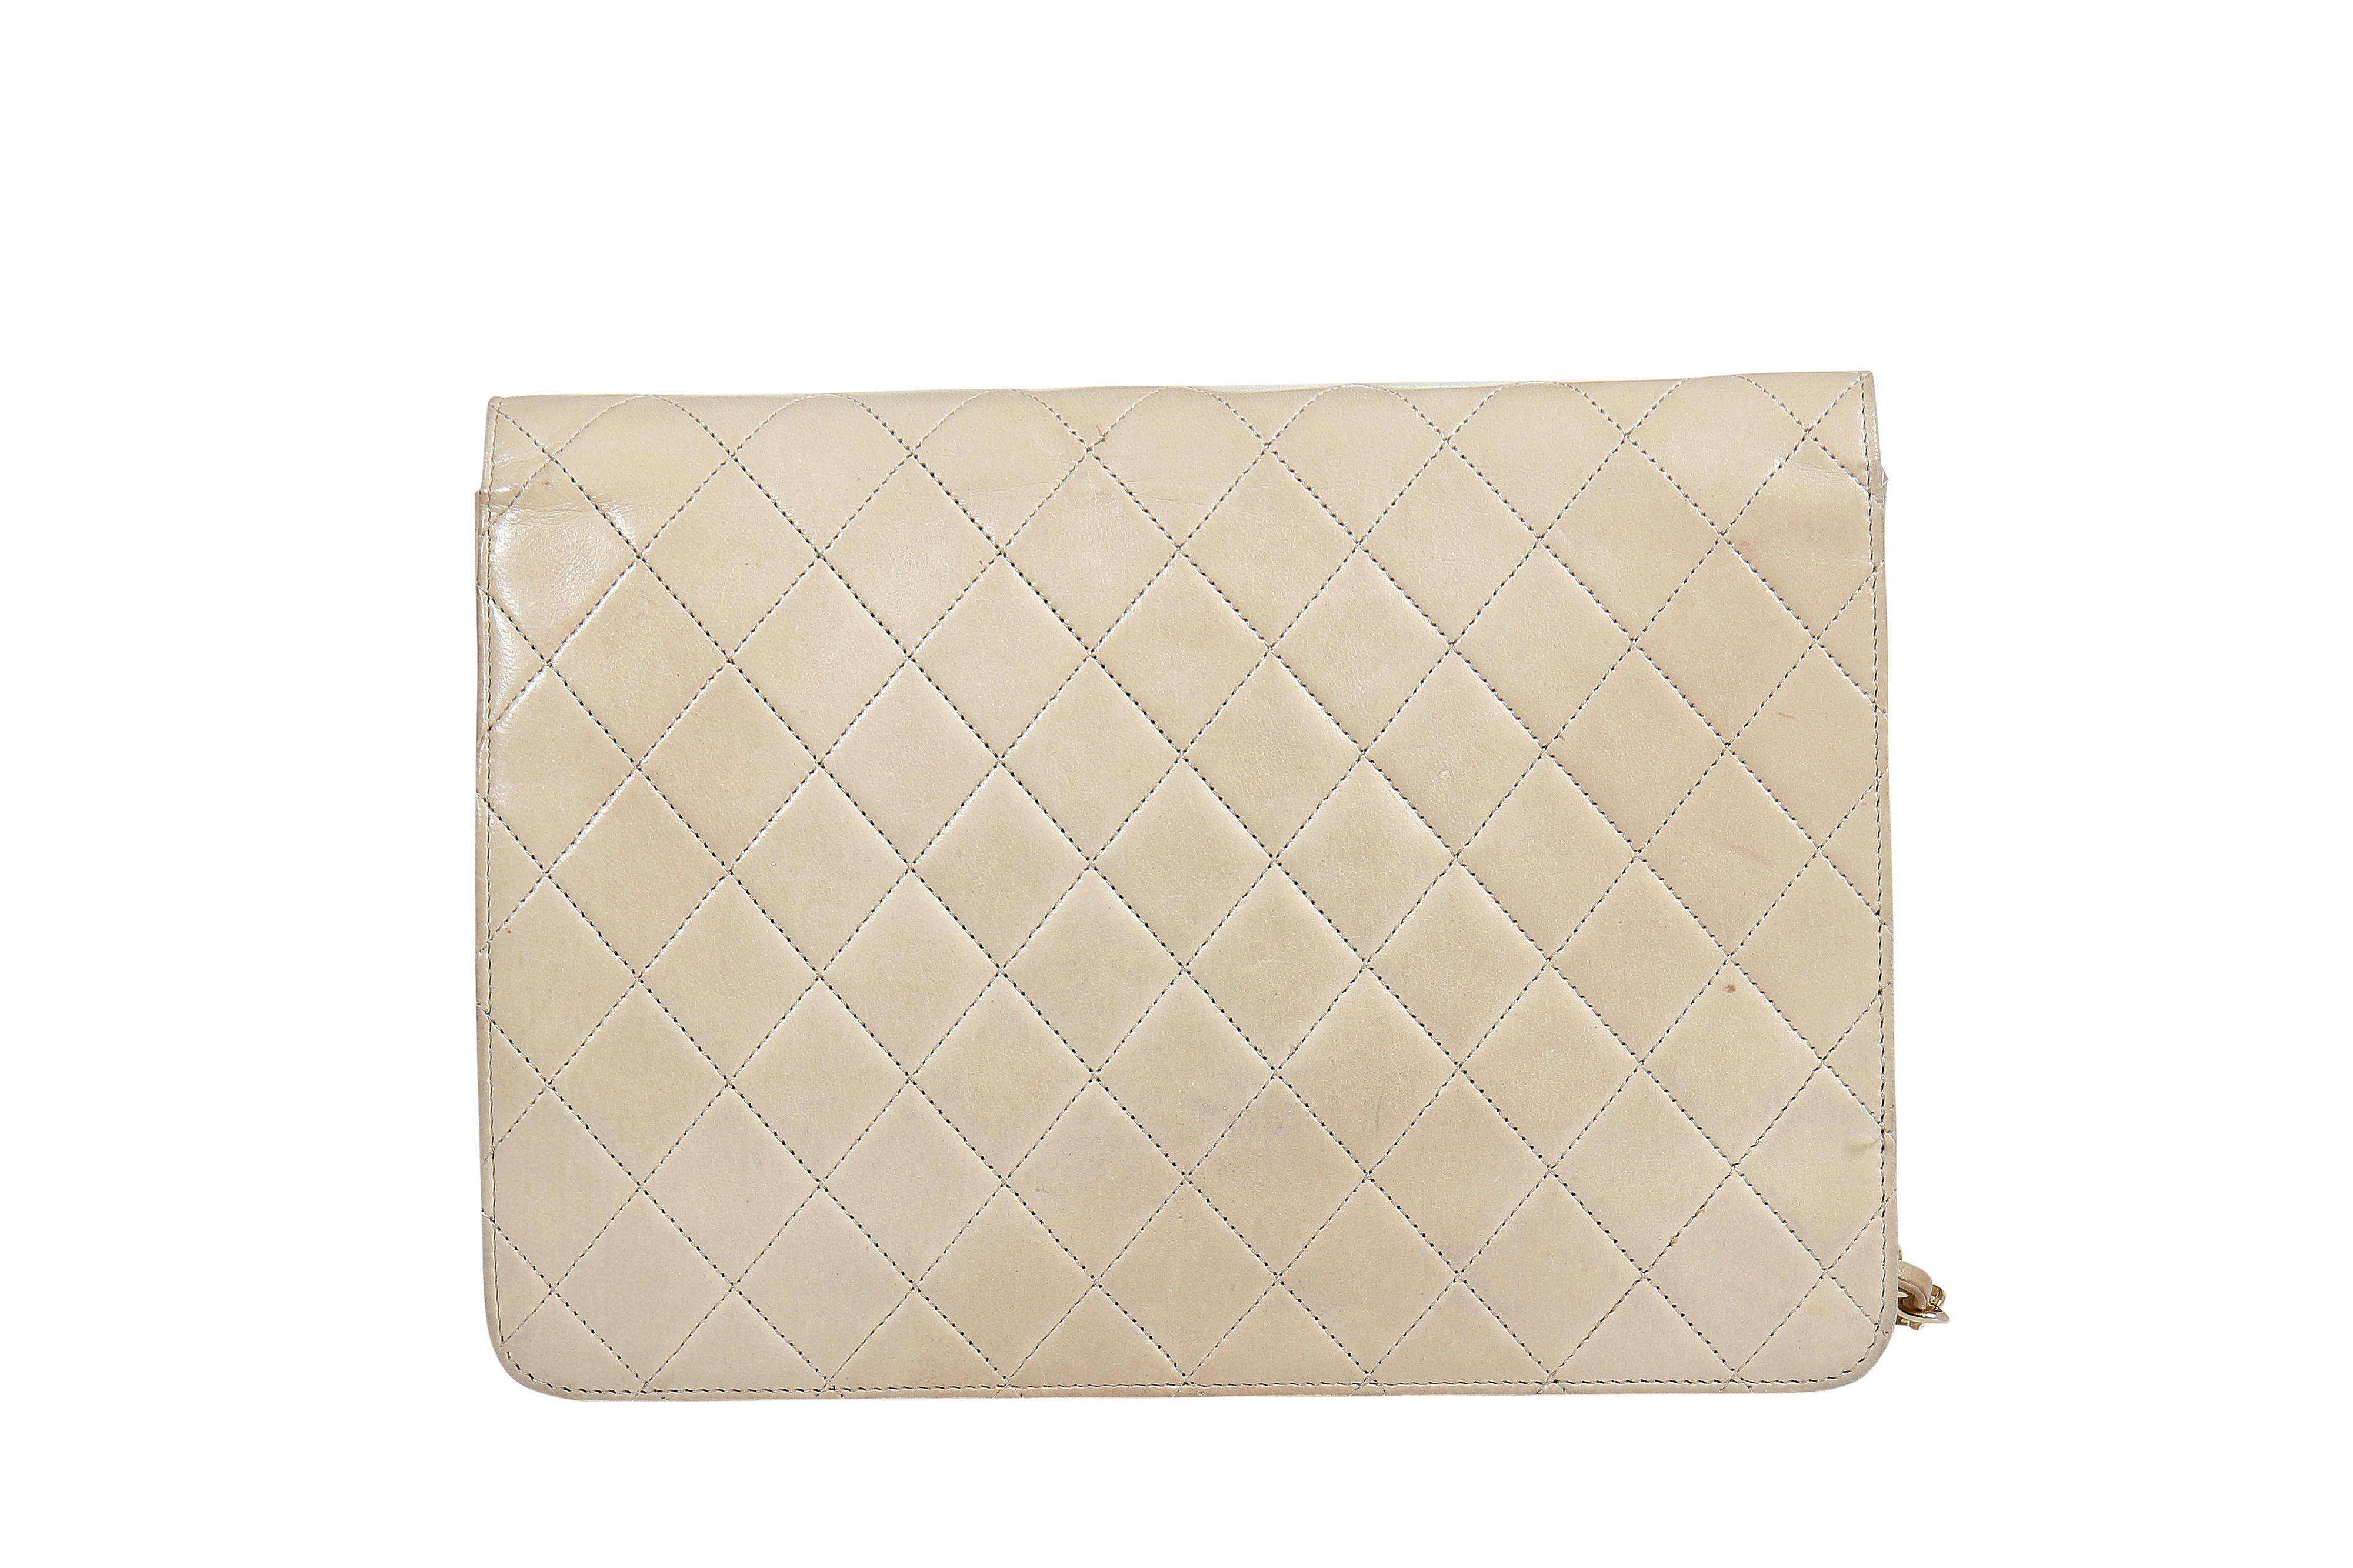 Lot 11 - A Chanel sand-coloured quilted lambskin